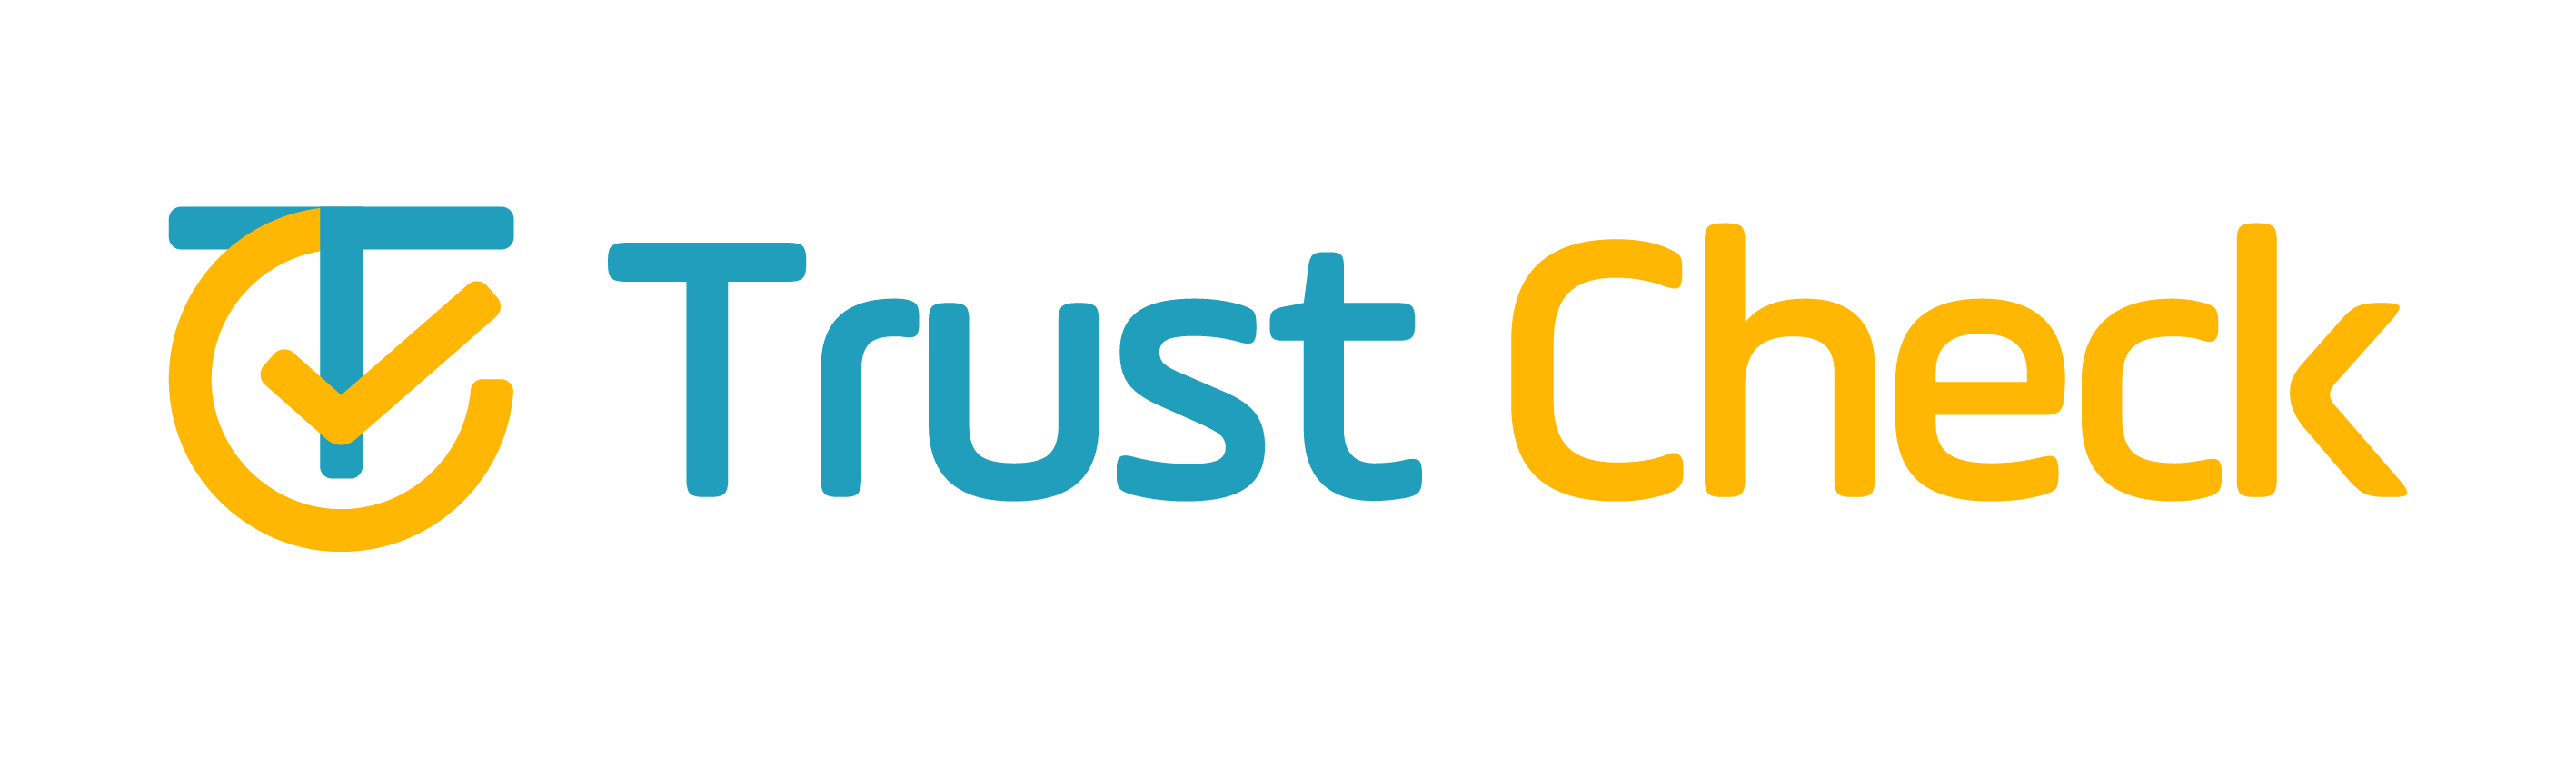 Truct-Check.org